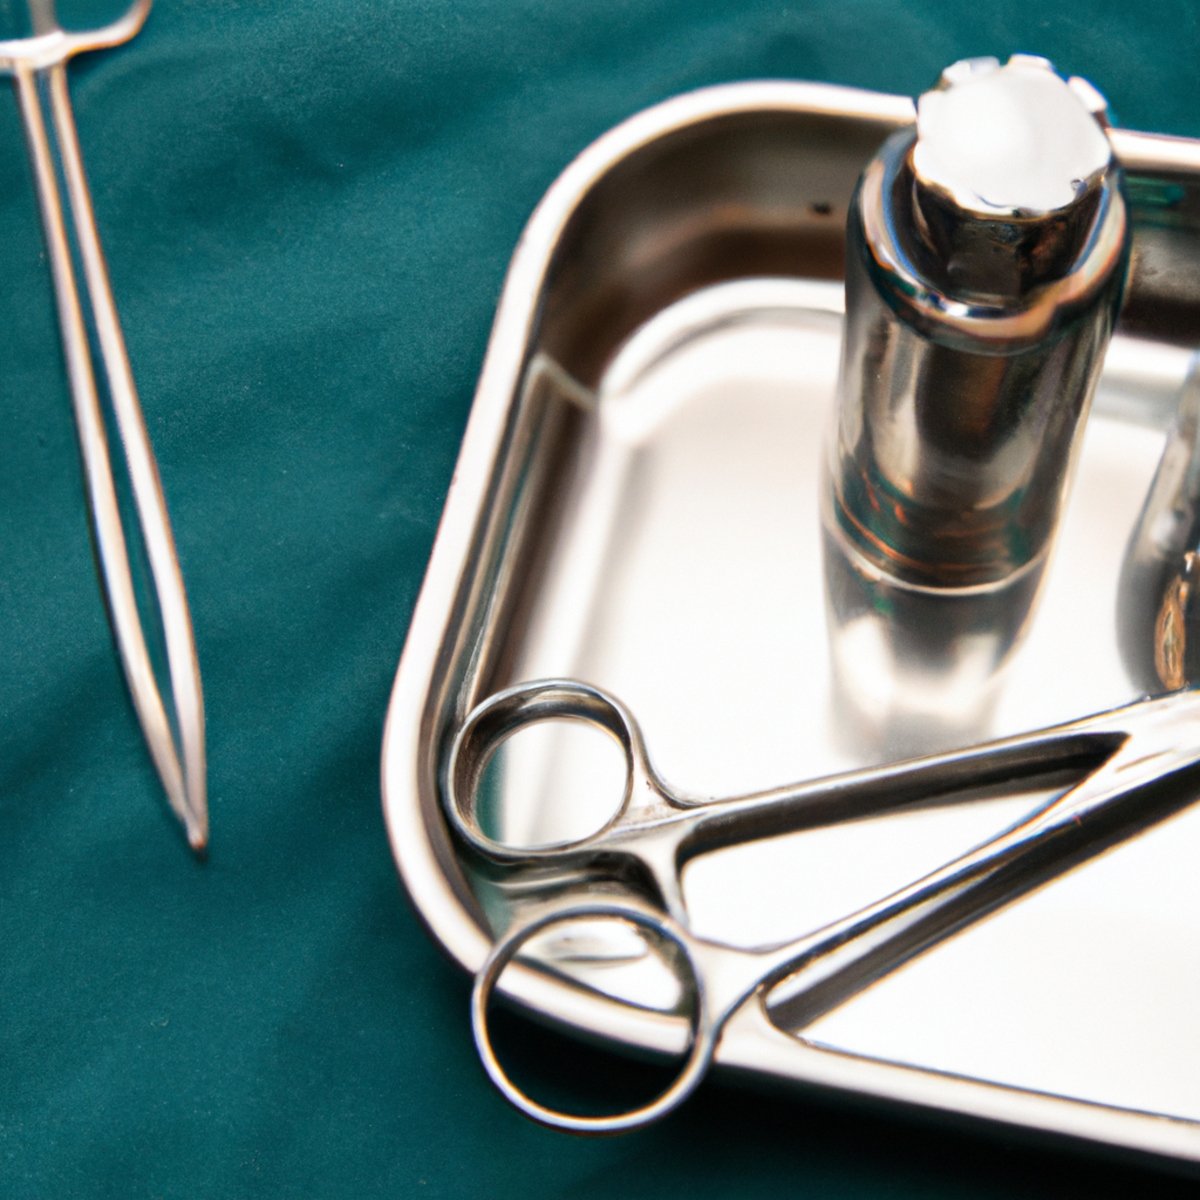 Sterile surgical tray with gleaming instruments and vial, highlighting precision in gallbladder carcinoid tumor treatment.